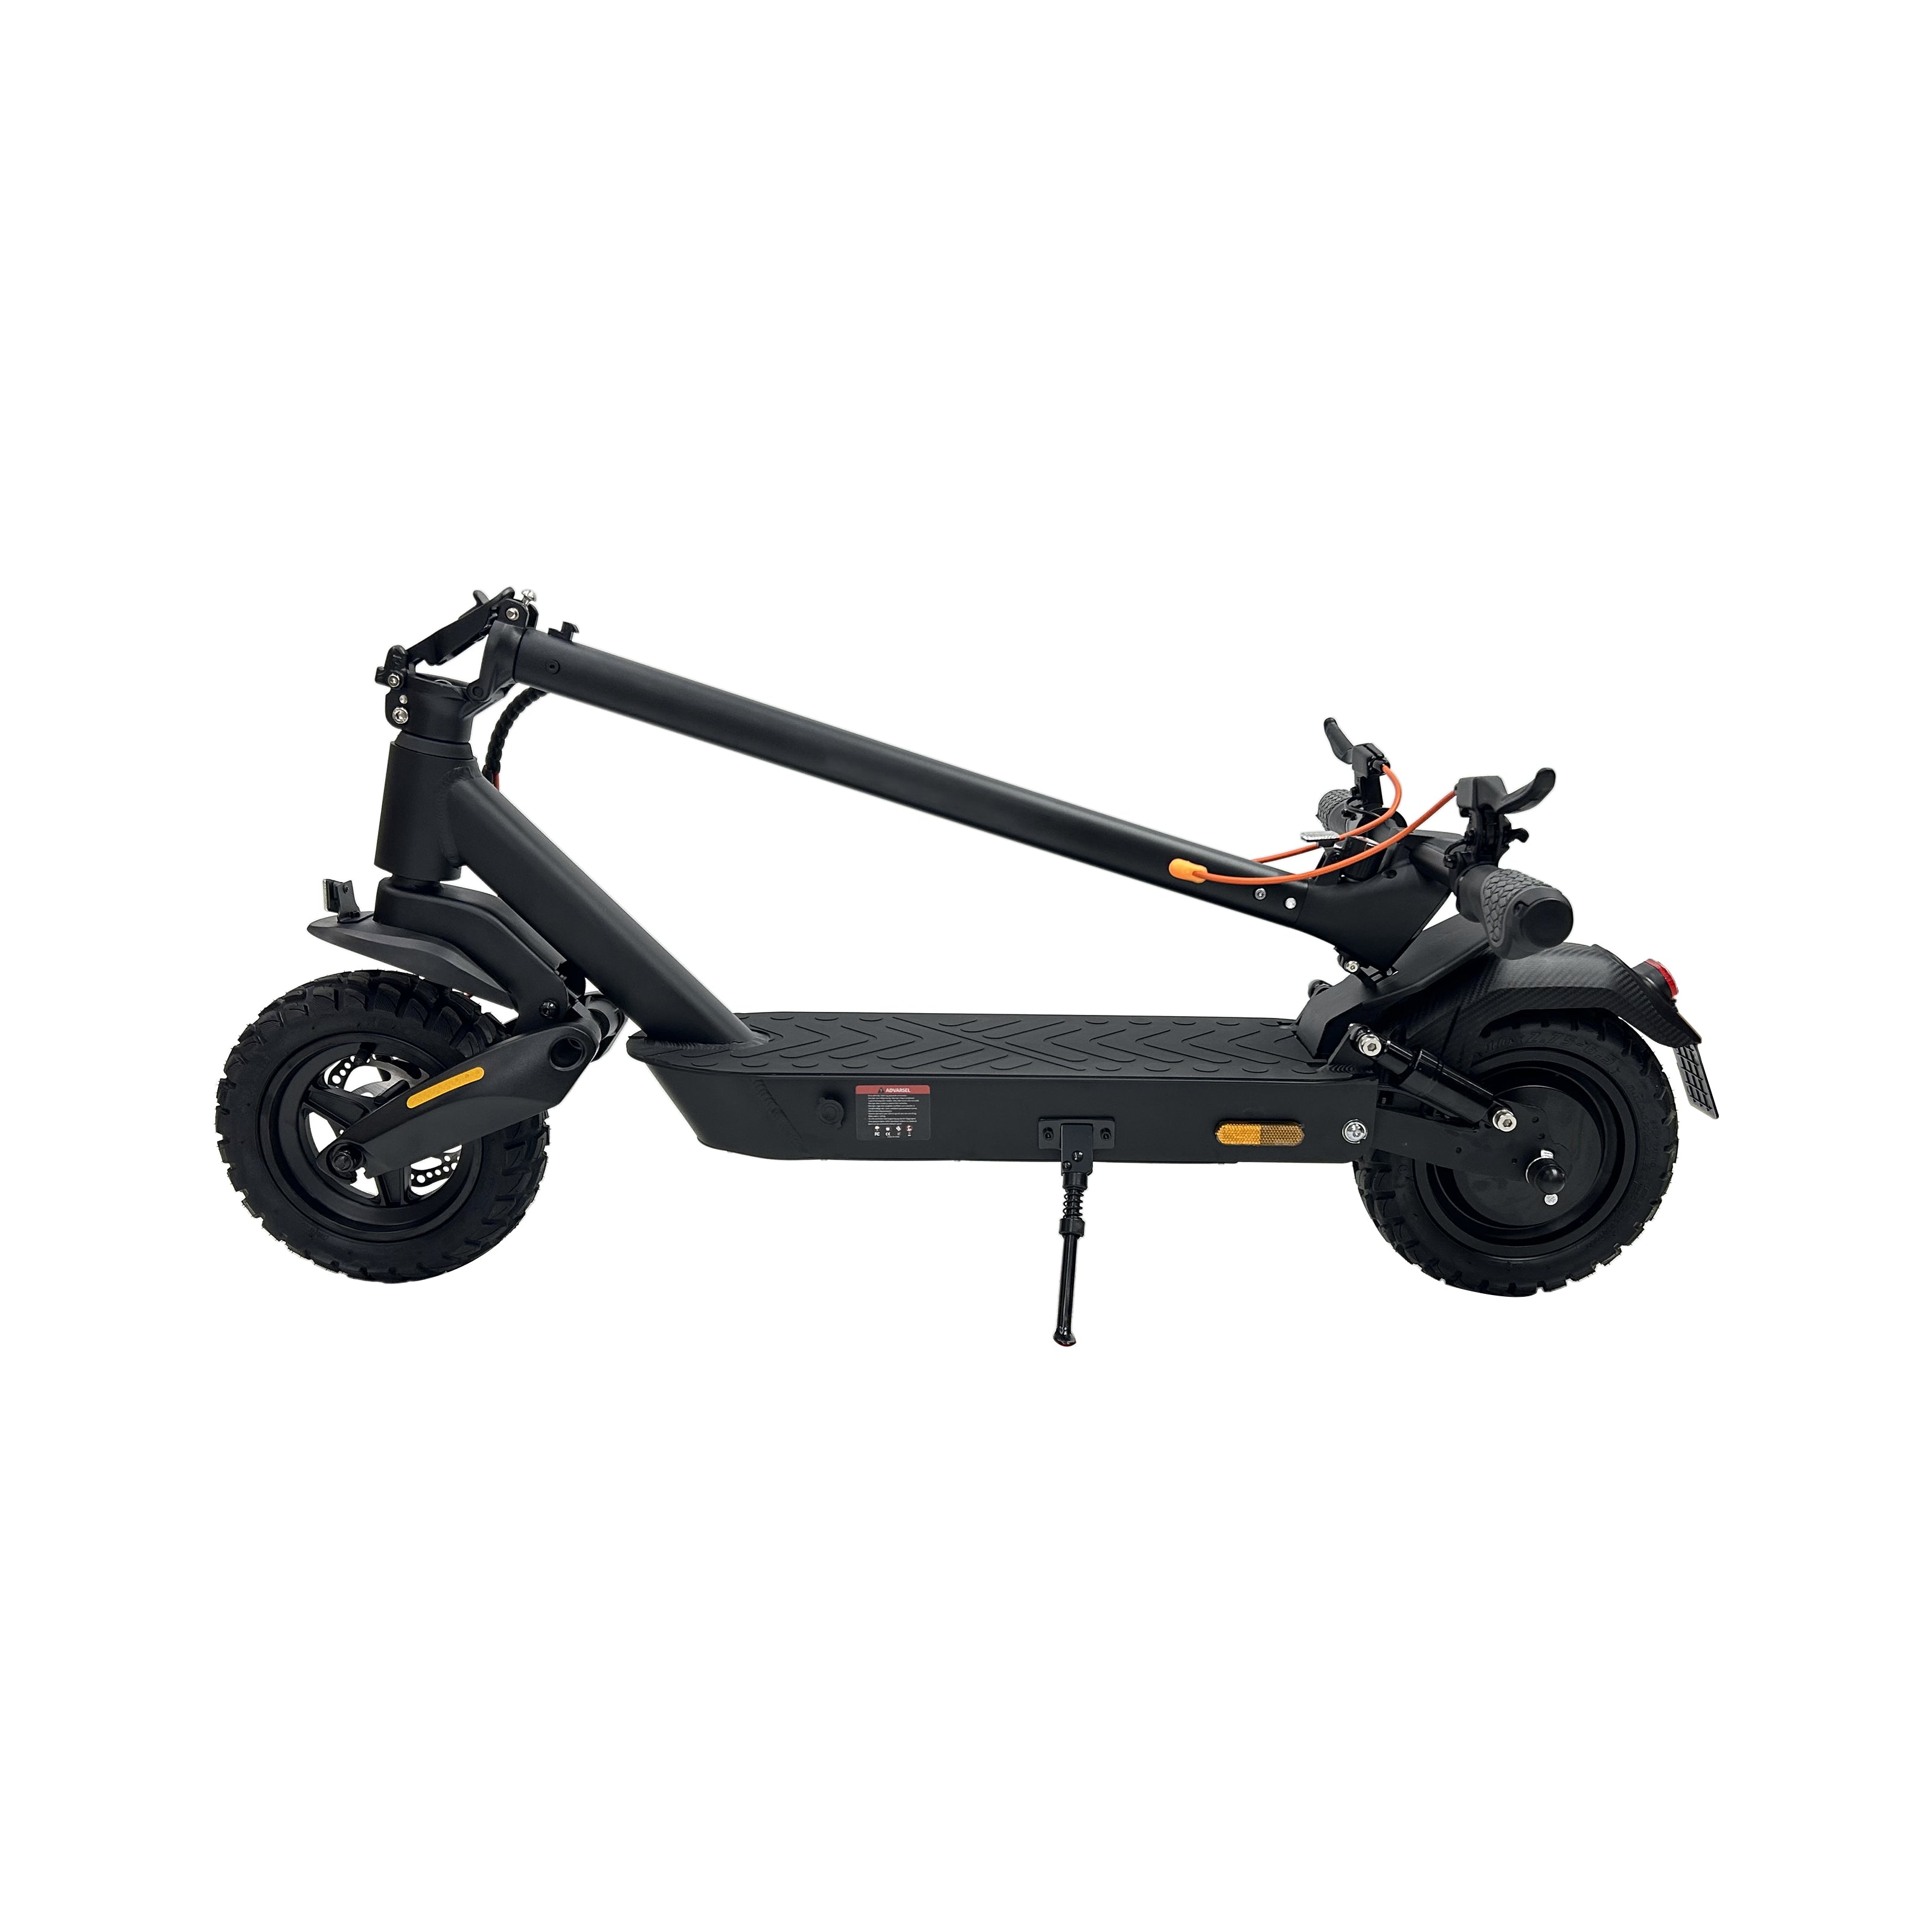 E9G-MAX 45-55kms range E Scooter with 500W motor 48V 12.5Ah Lithium Battery